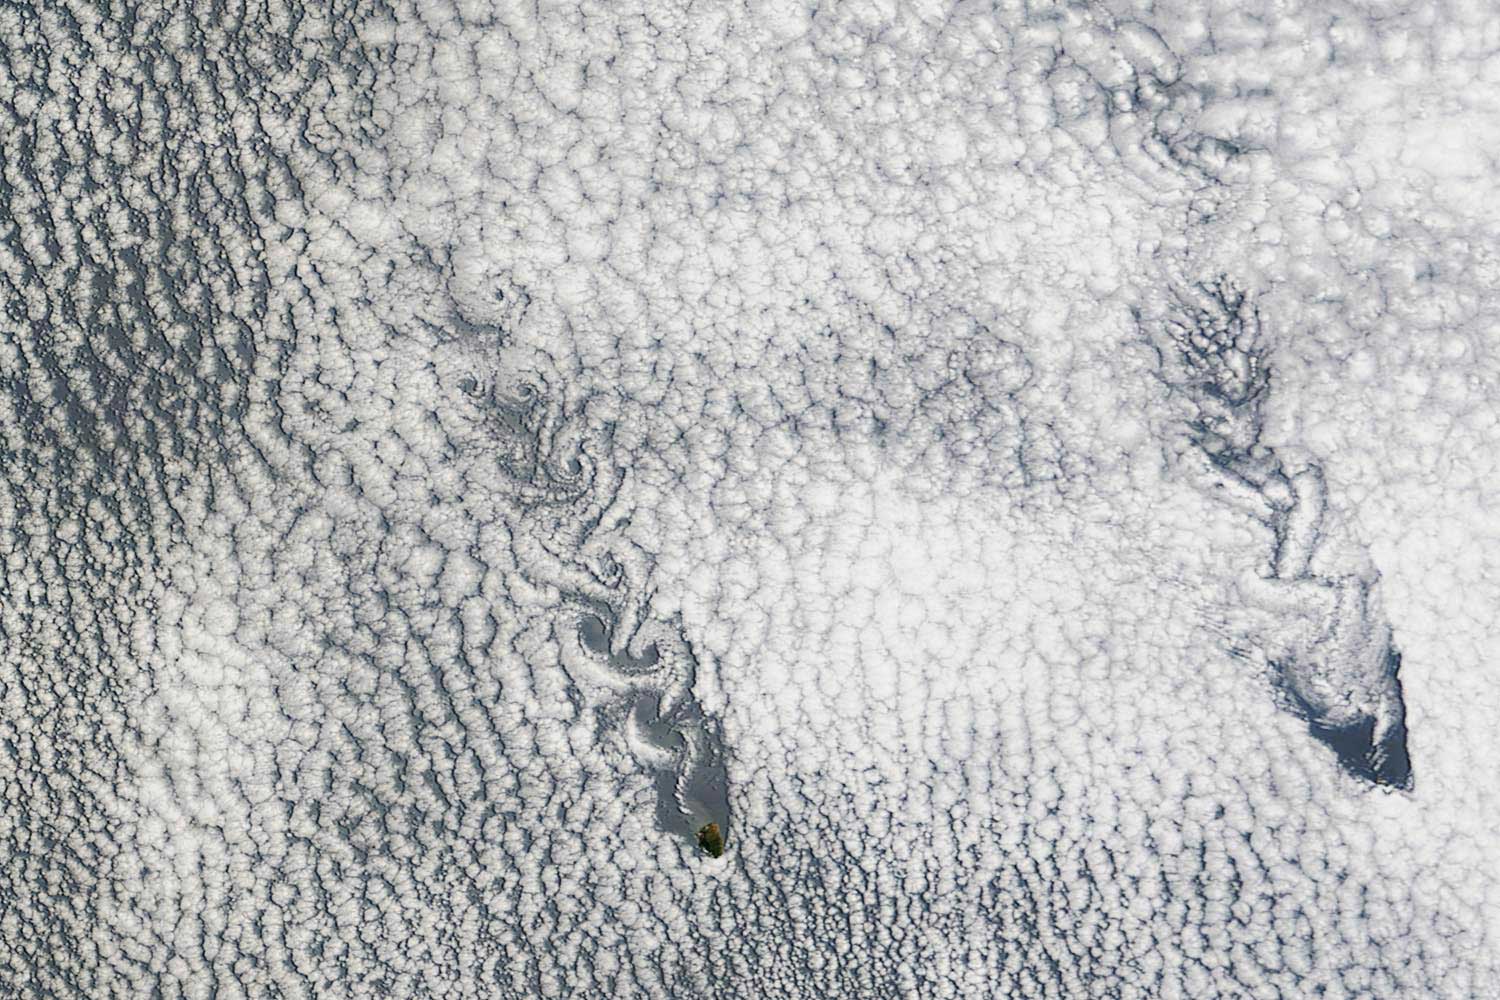 Two small islands had a big impact on the skies over the Pacific Ocean, disrupting clouds in a way that created a paisley pattern 175 miles long.